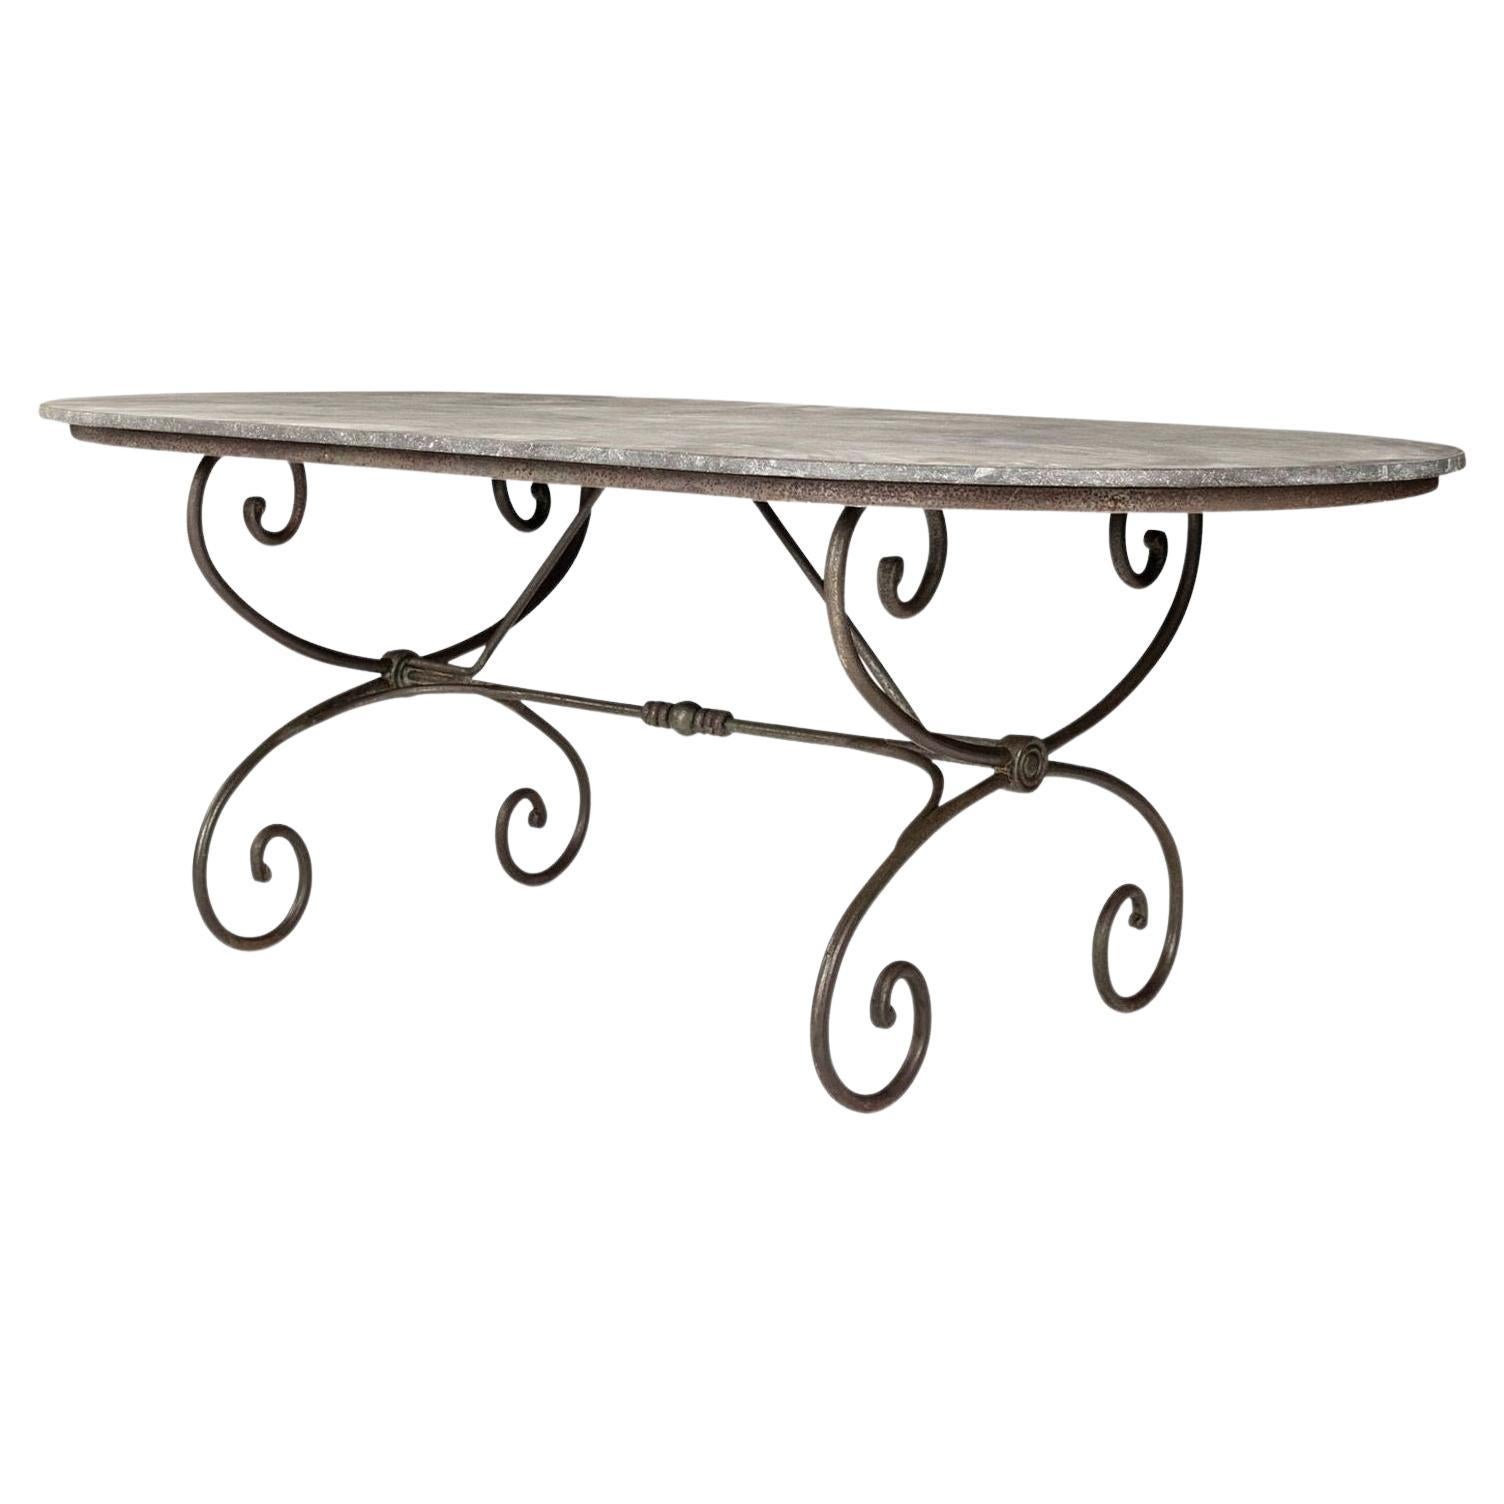 Large Oval-Shape Belgian Bluestone Top Dining Table     For Sale